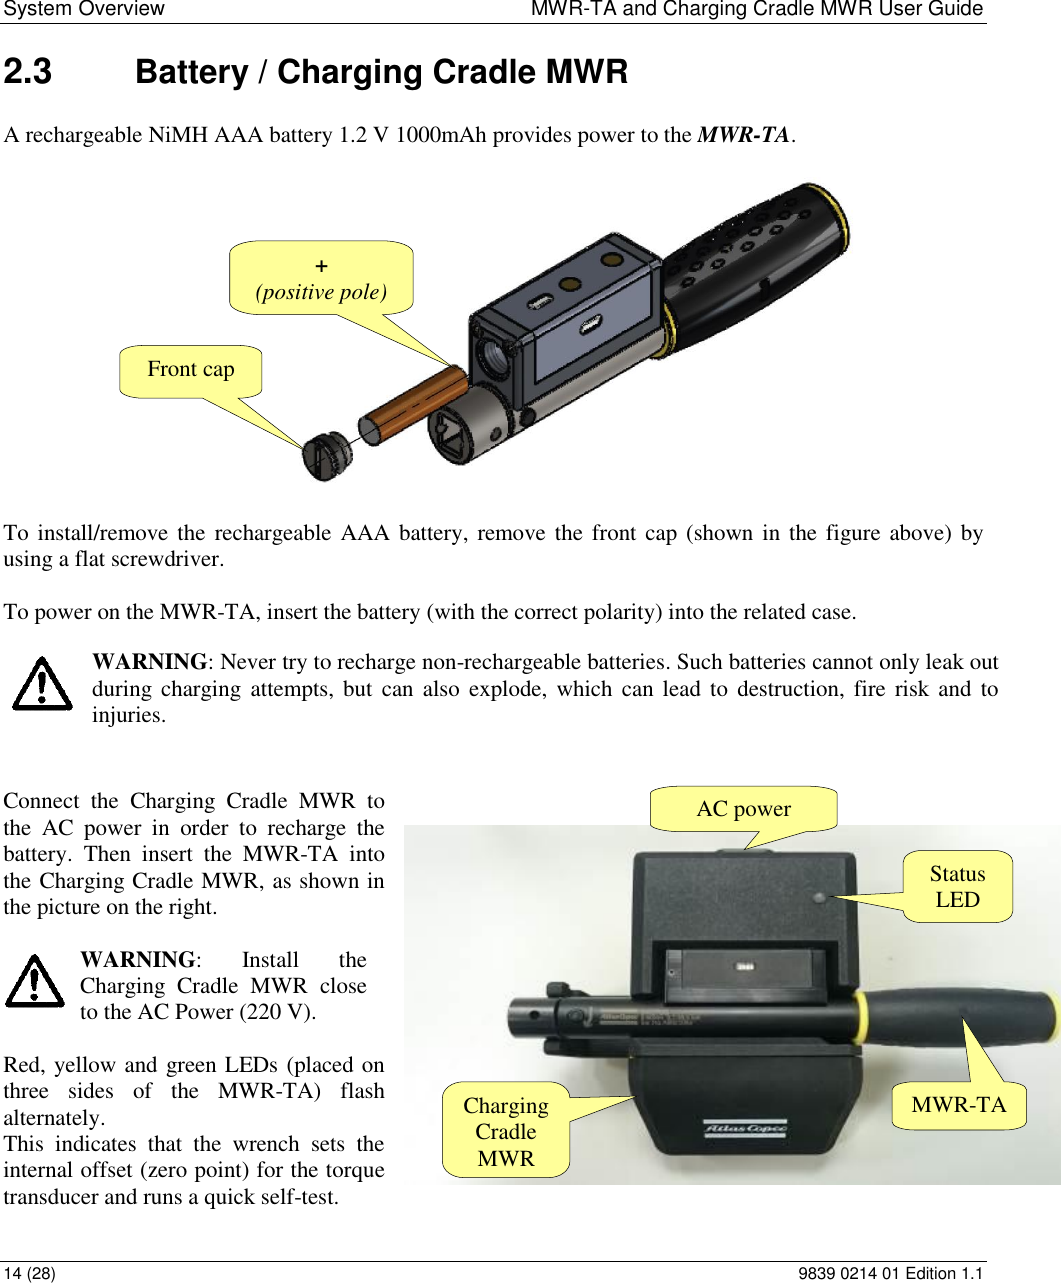 System Overview  MWR-TA and Charging Cradle MWR User Guide 14 (28)  9839 0214 01 Edition 1.1 2.3  Battery / Charging Cradle MWR A rechargeable NiMH AAA battery 1.2 V 1000mAh provides power to the MWR-TA.    To install/remove  the  rechargeable AAA battery, remove the front cap (shown  in the figure above) by using a flat screwdriver.  To power on the MWR-TA, insert the battery (with the correct polarity) into the related case.   WARNING: Never try to recharge non-rechargeable batteries. Such batteries cannot only leak out during charging  attempts, but  can  also  explode, which  can lead  to  destruction, fire  risk and  to injuries.   Connect  the  Charging  Cradle  MWR  to the  AC  power  in  order  to  recharge  the battery.  Then  insert  the  MWR-TA  into the Charging Cradle MWR, as shown in the picture on the right.    WARNING:  Install  the Charging  Cradle  MWR  close to the AC Power (220 V).  Red, yellow and green LEDs (placed on three  sides  of  the  MWR-TA)  flash alternately.  This  indicates  that  the  wrench  sets  the internal offset (zero point) for the torque transducer and runs a quick self-test. + (positive pole) Front cap Charging Cradle MWR MWR-TA AC power Status LED 